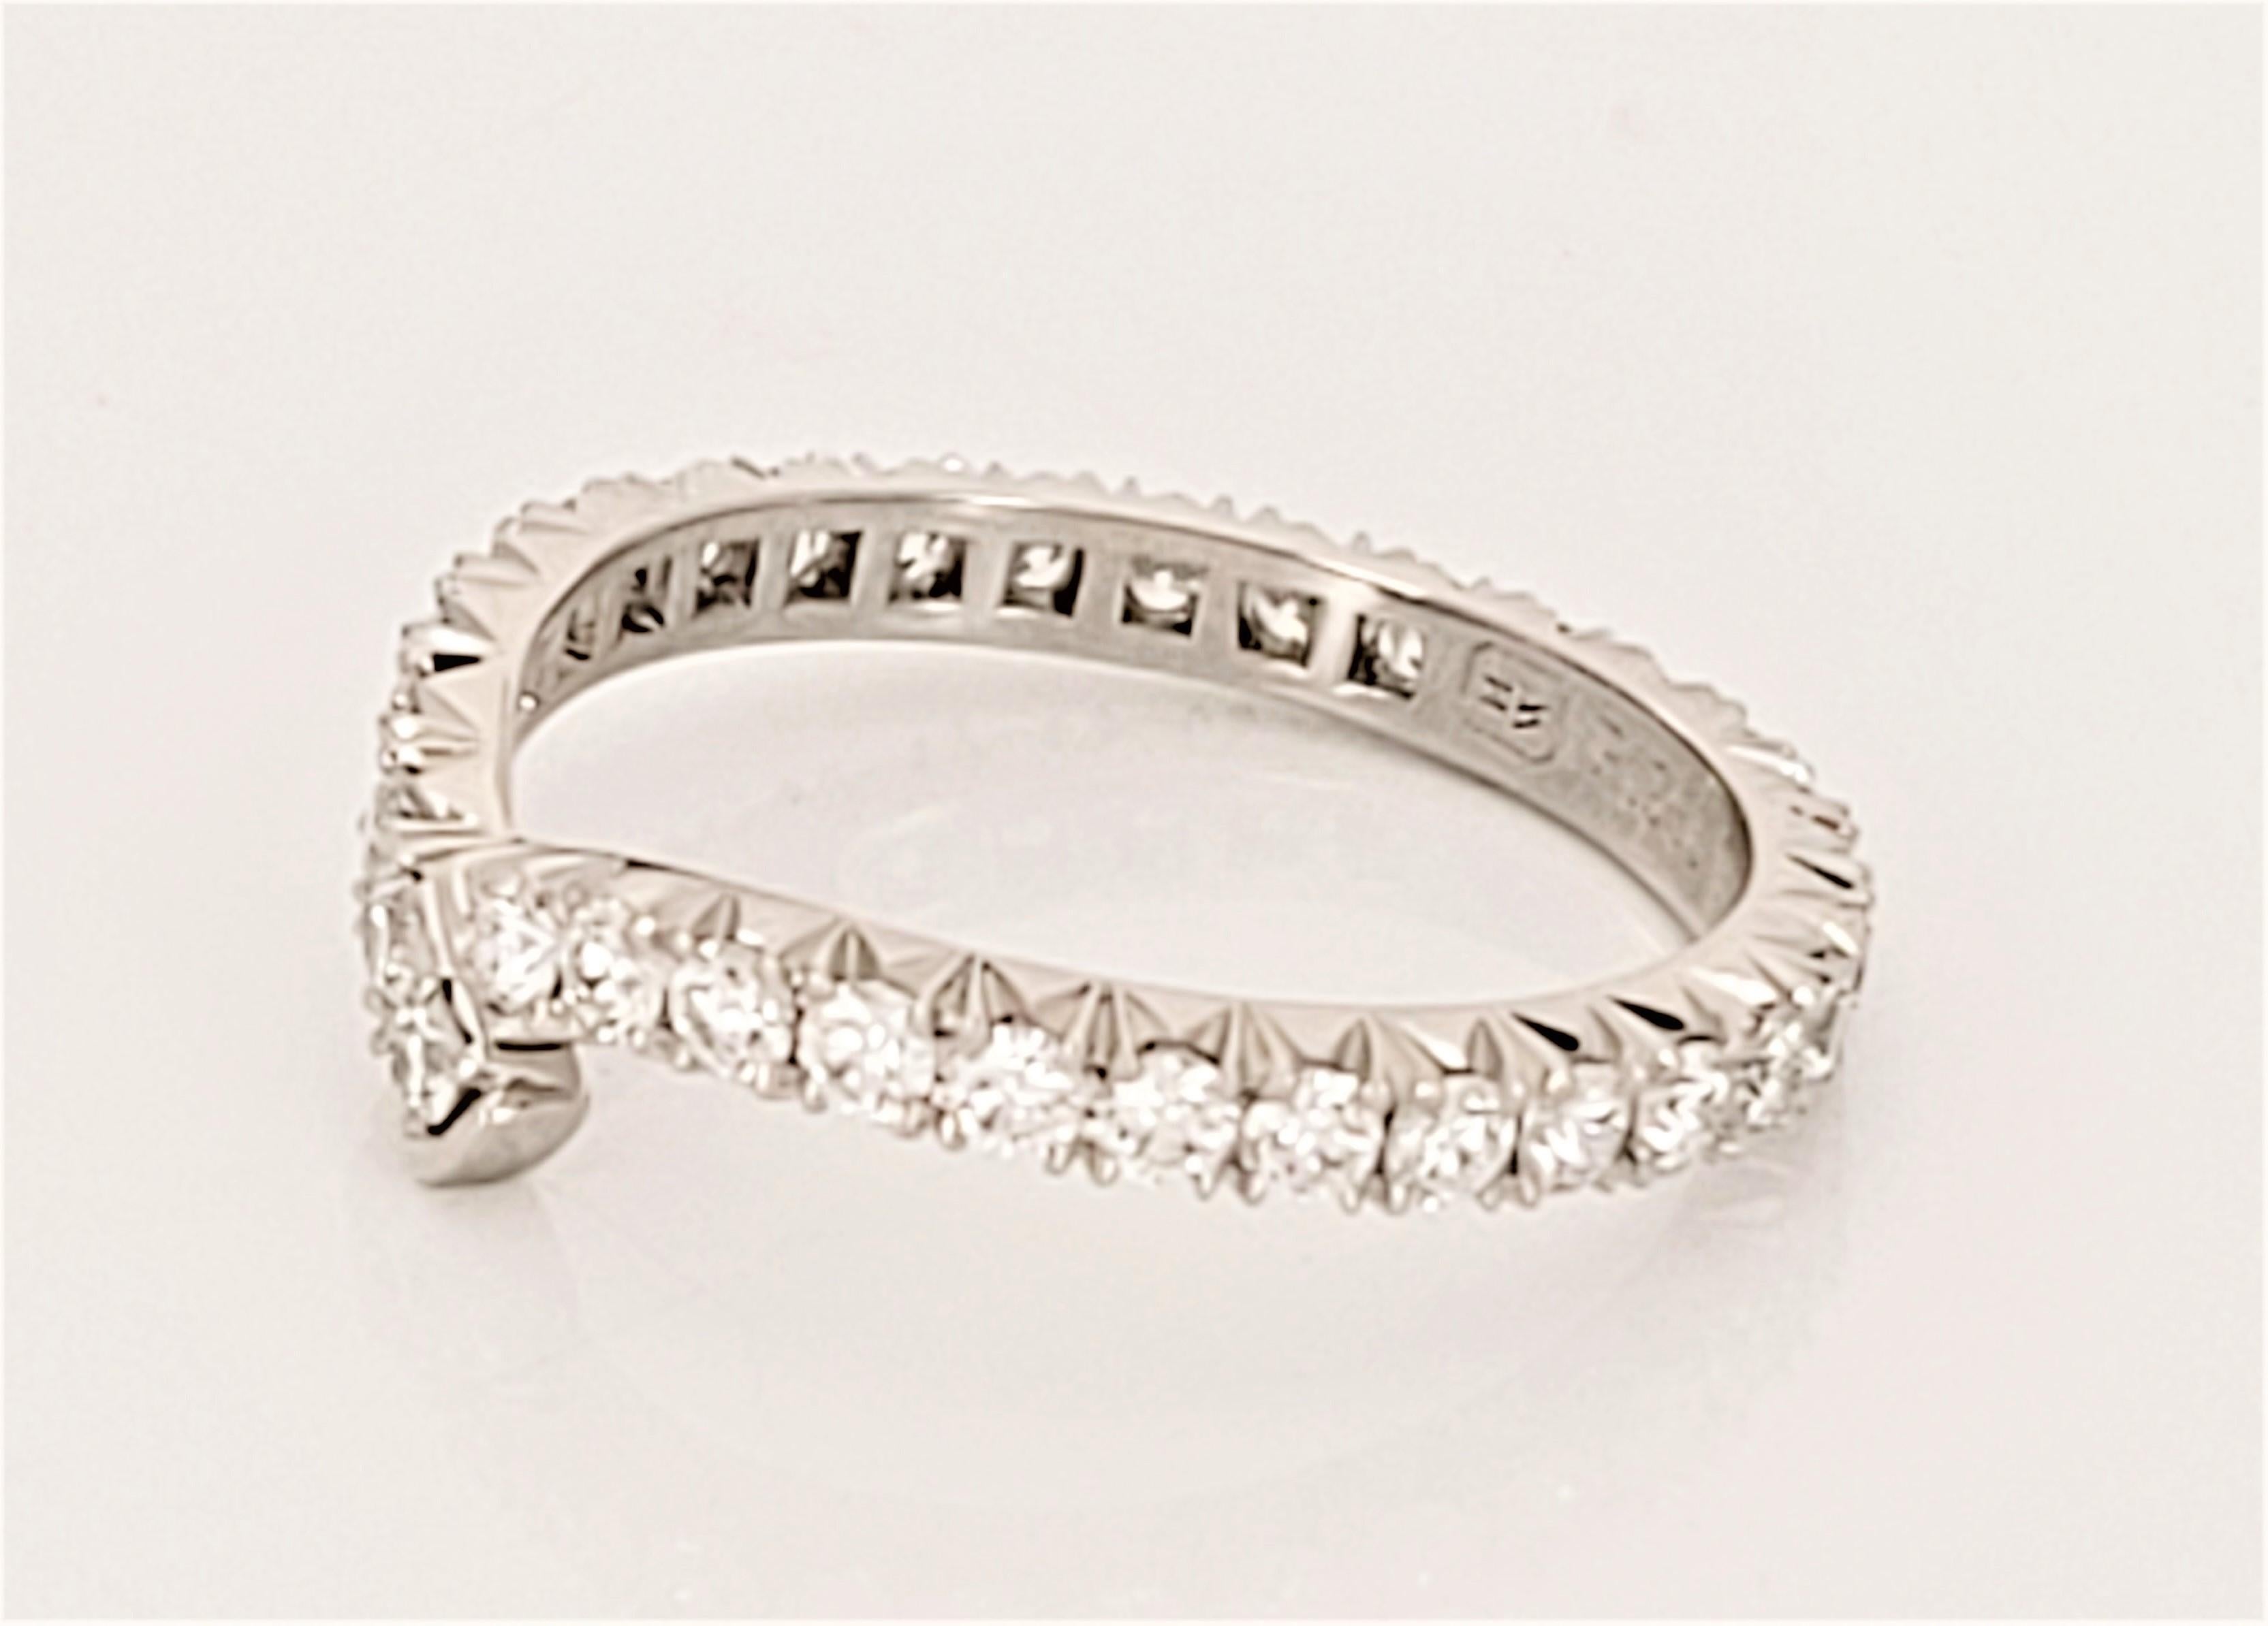 Brand Harry Winston  
Engagement ring
Platinum 950
Ring Shape unique 
Ring Size 6.25
Ring weight 3.2gr
Diamond wedding band
The wedding band features 31 round brilliant diamonds
Wedding Band can also be worn as a stackable fashion ring 
Diamond